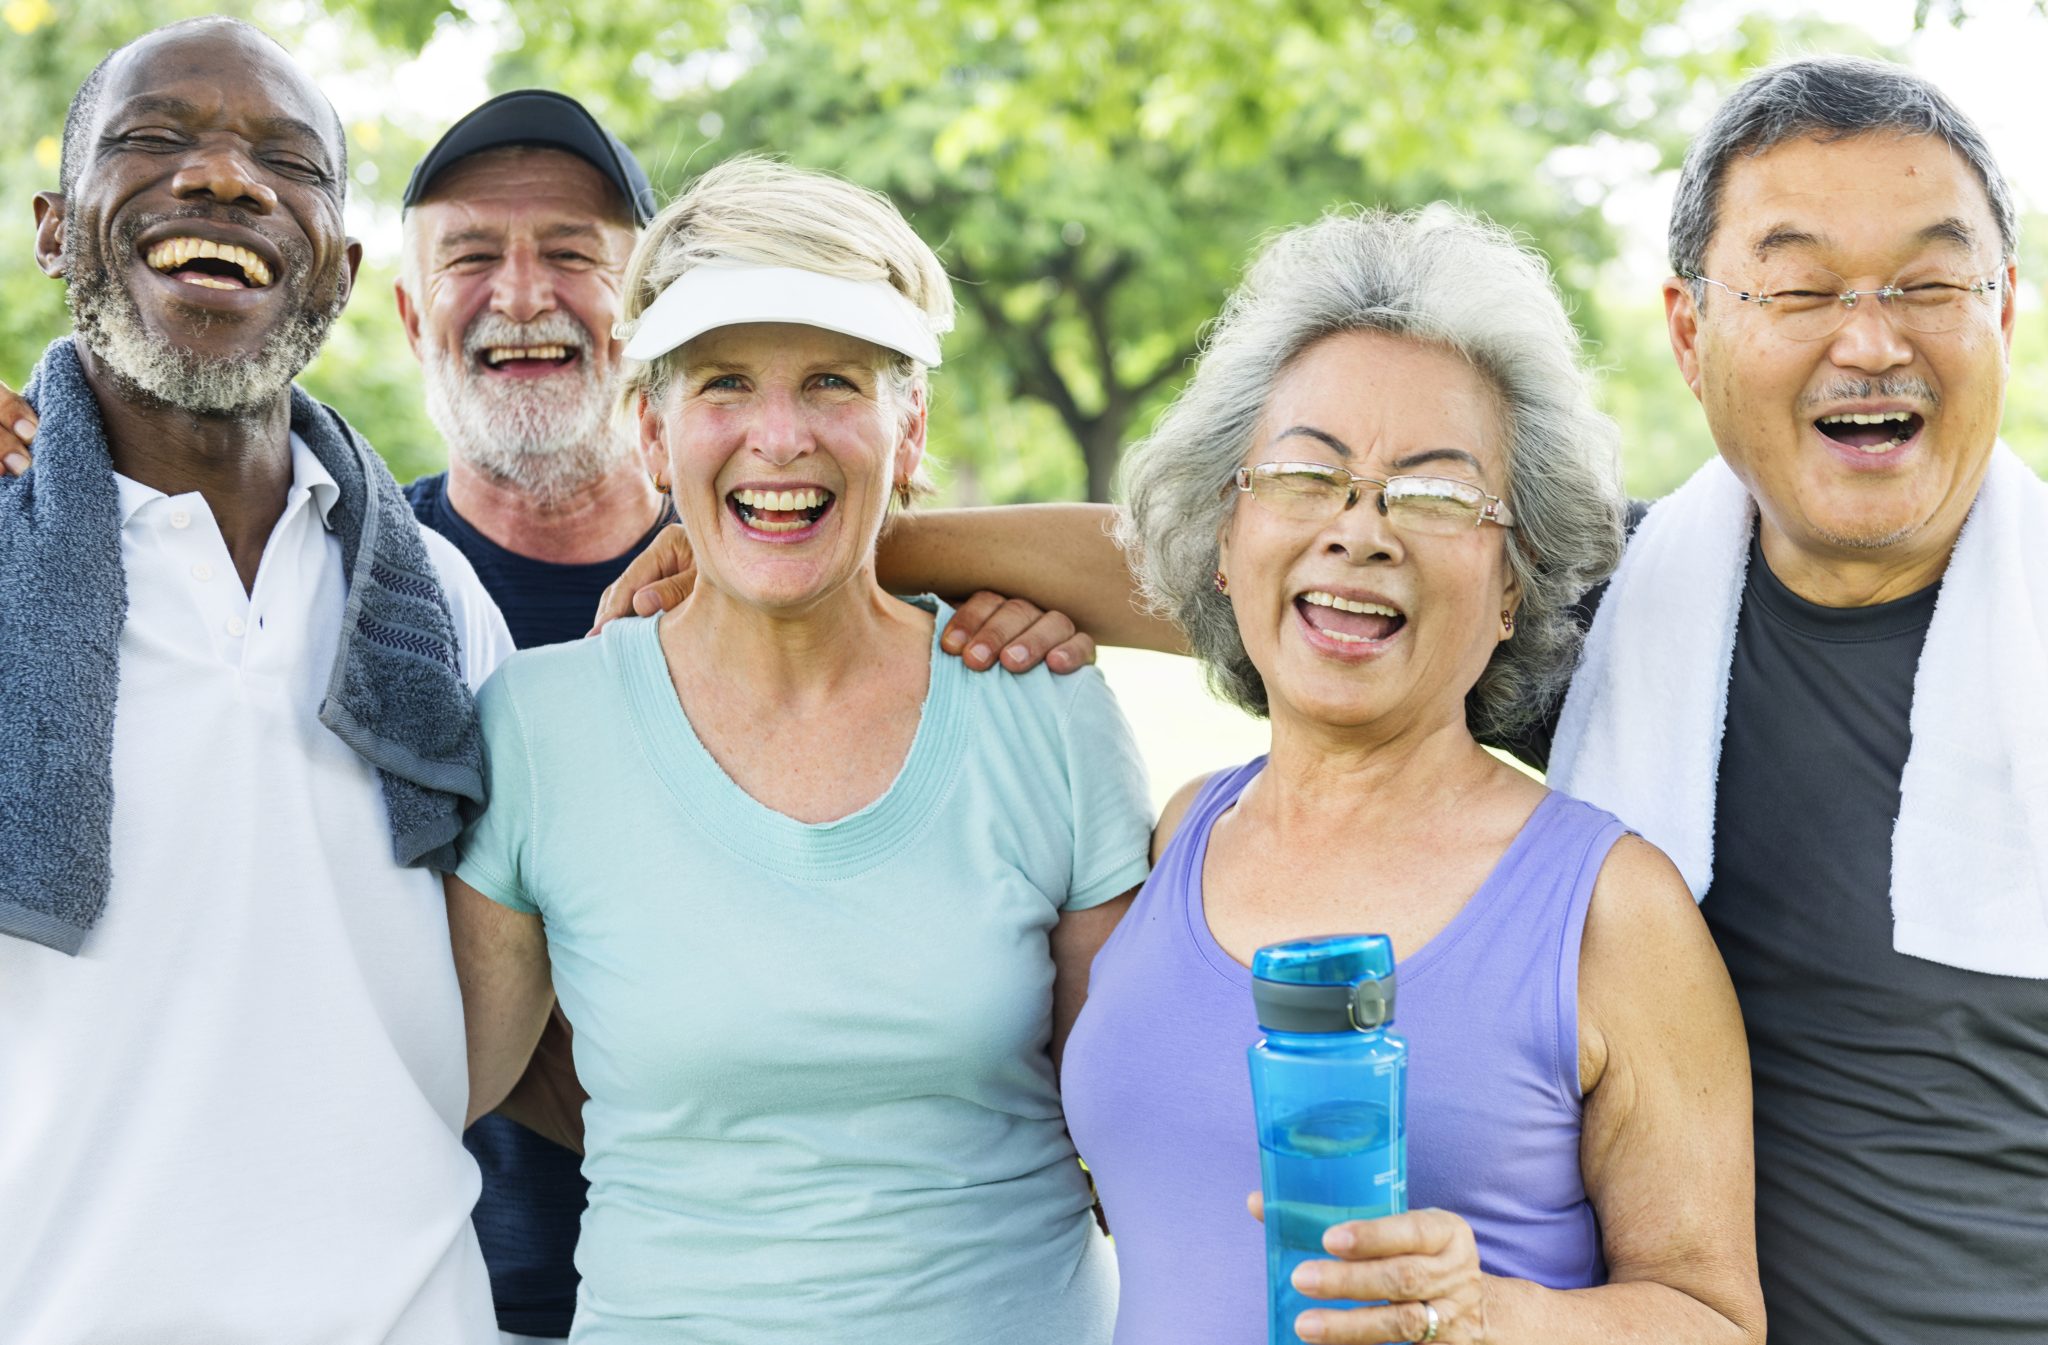 Healthy ageing is important for a longer and happier life